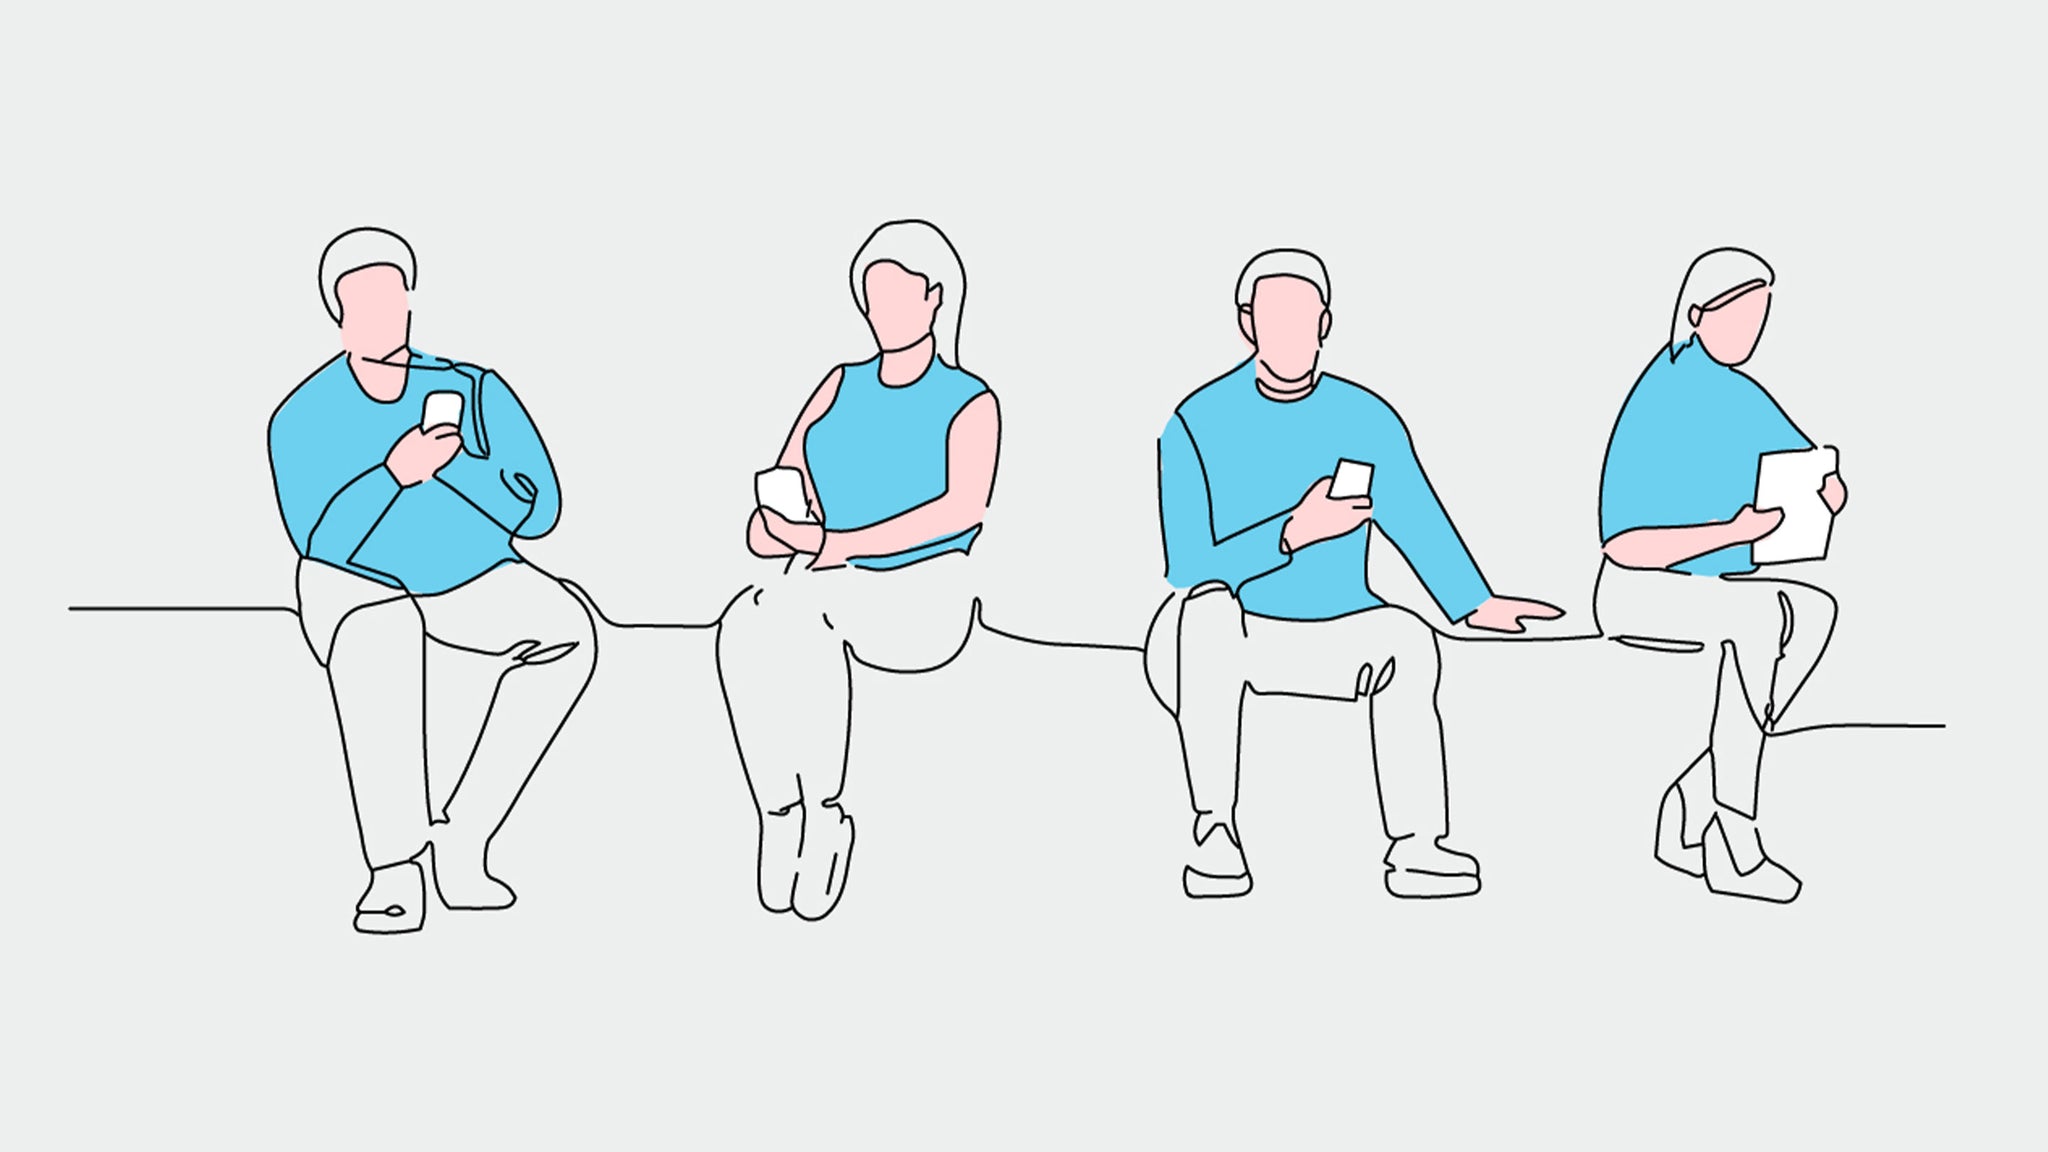 Illustration with single line of people connected to their devices.